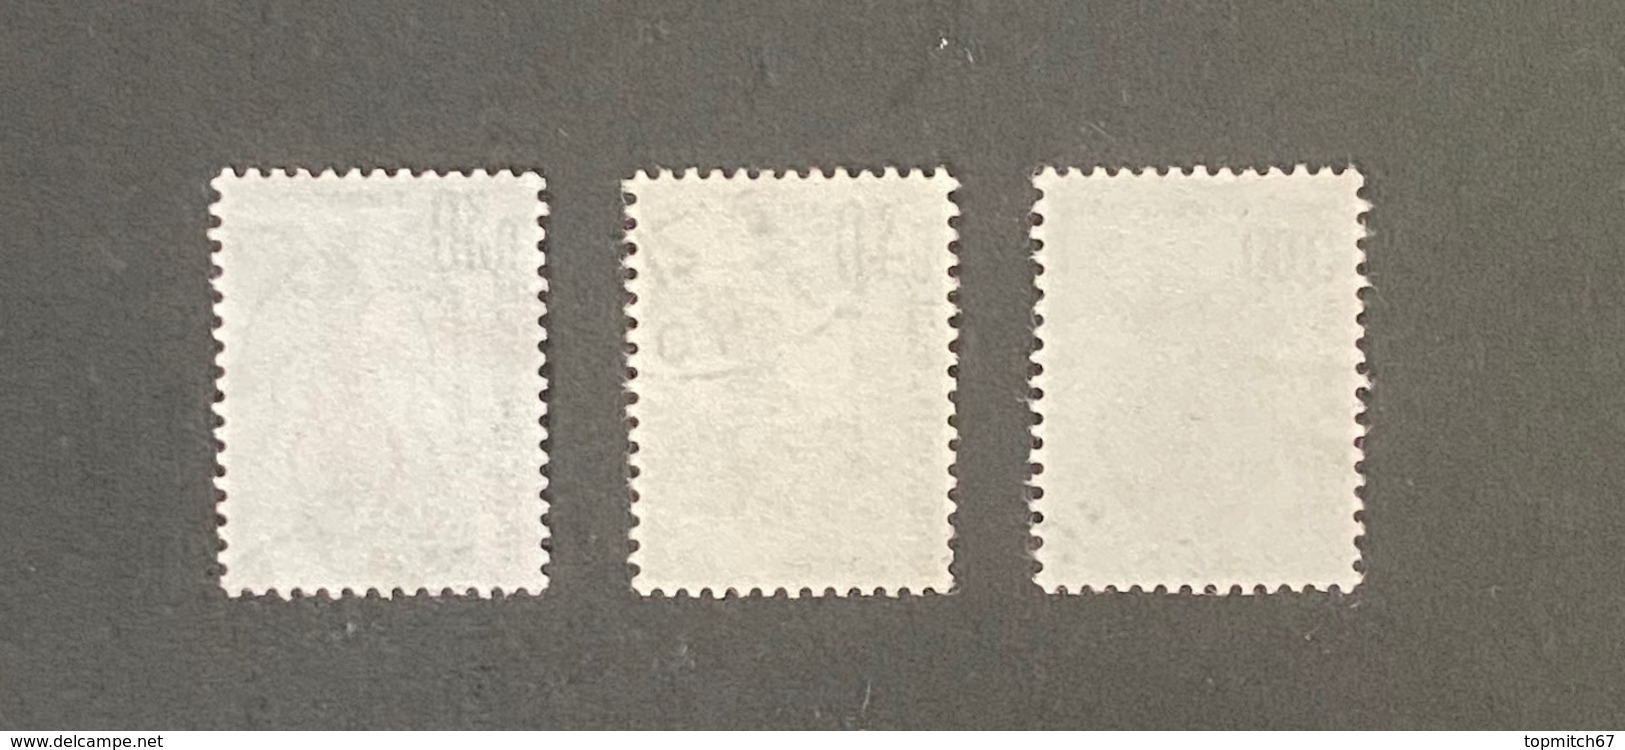 FRAYX109-11U - Timbres Taxe Insectes Coléoptères (I) Set Of 3 Used Stamps 1983 - France YT YX 109-11 - Sellos